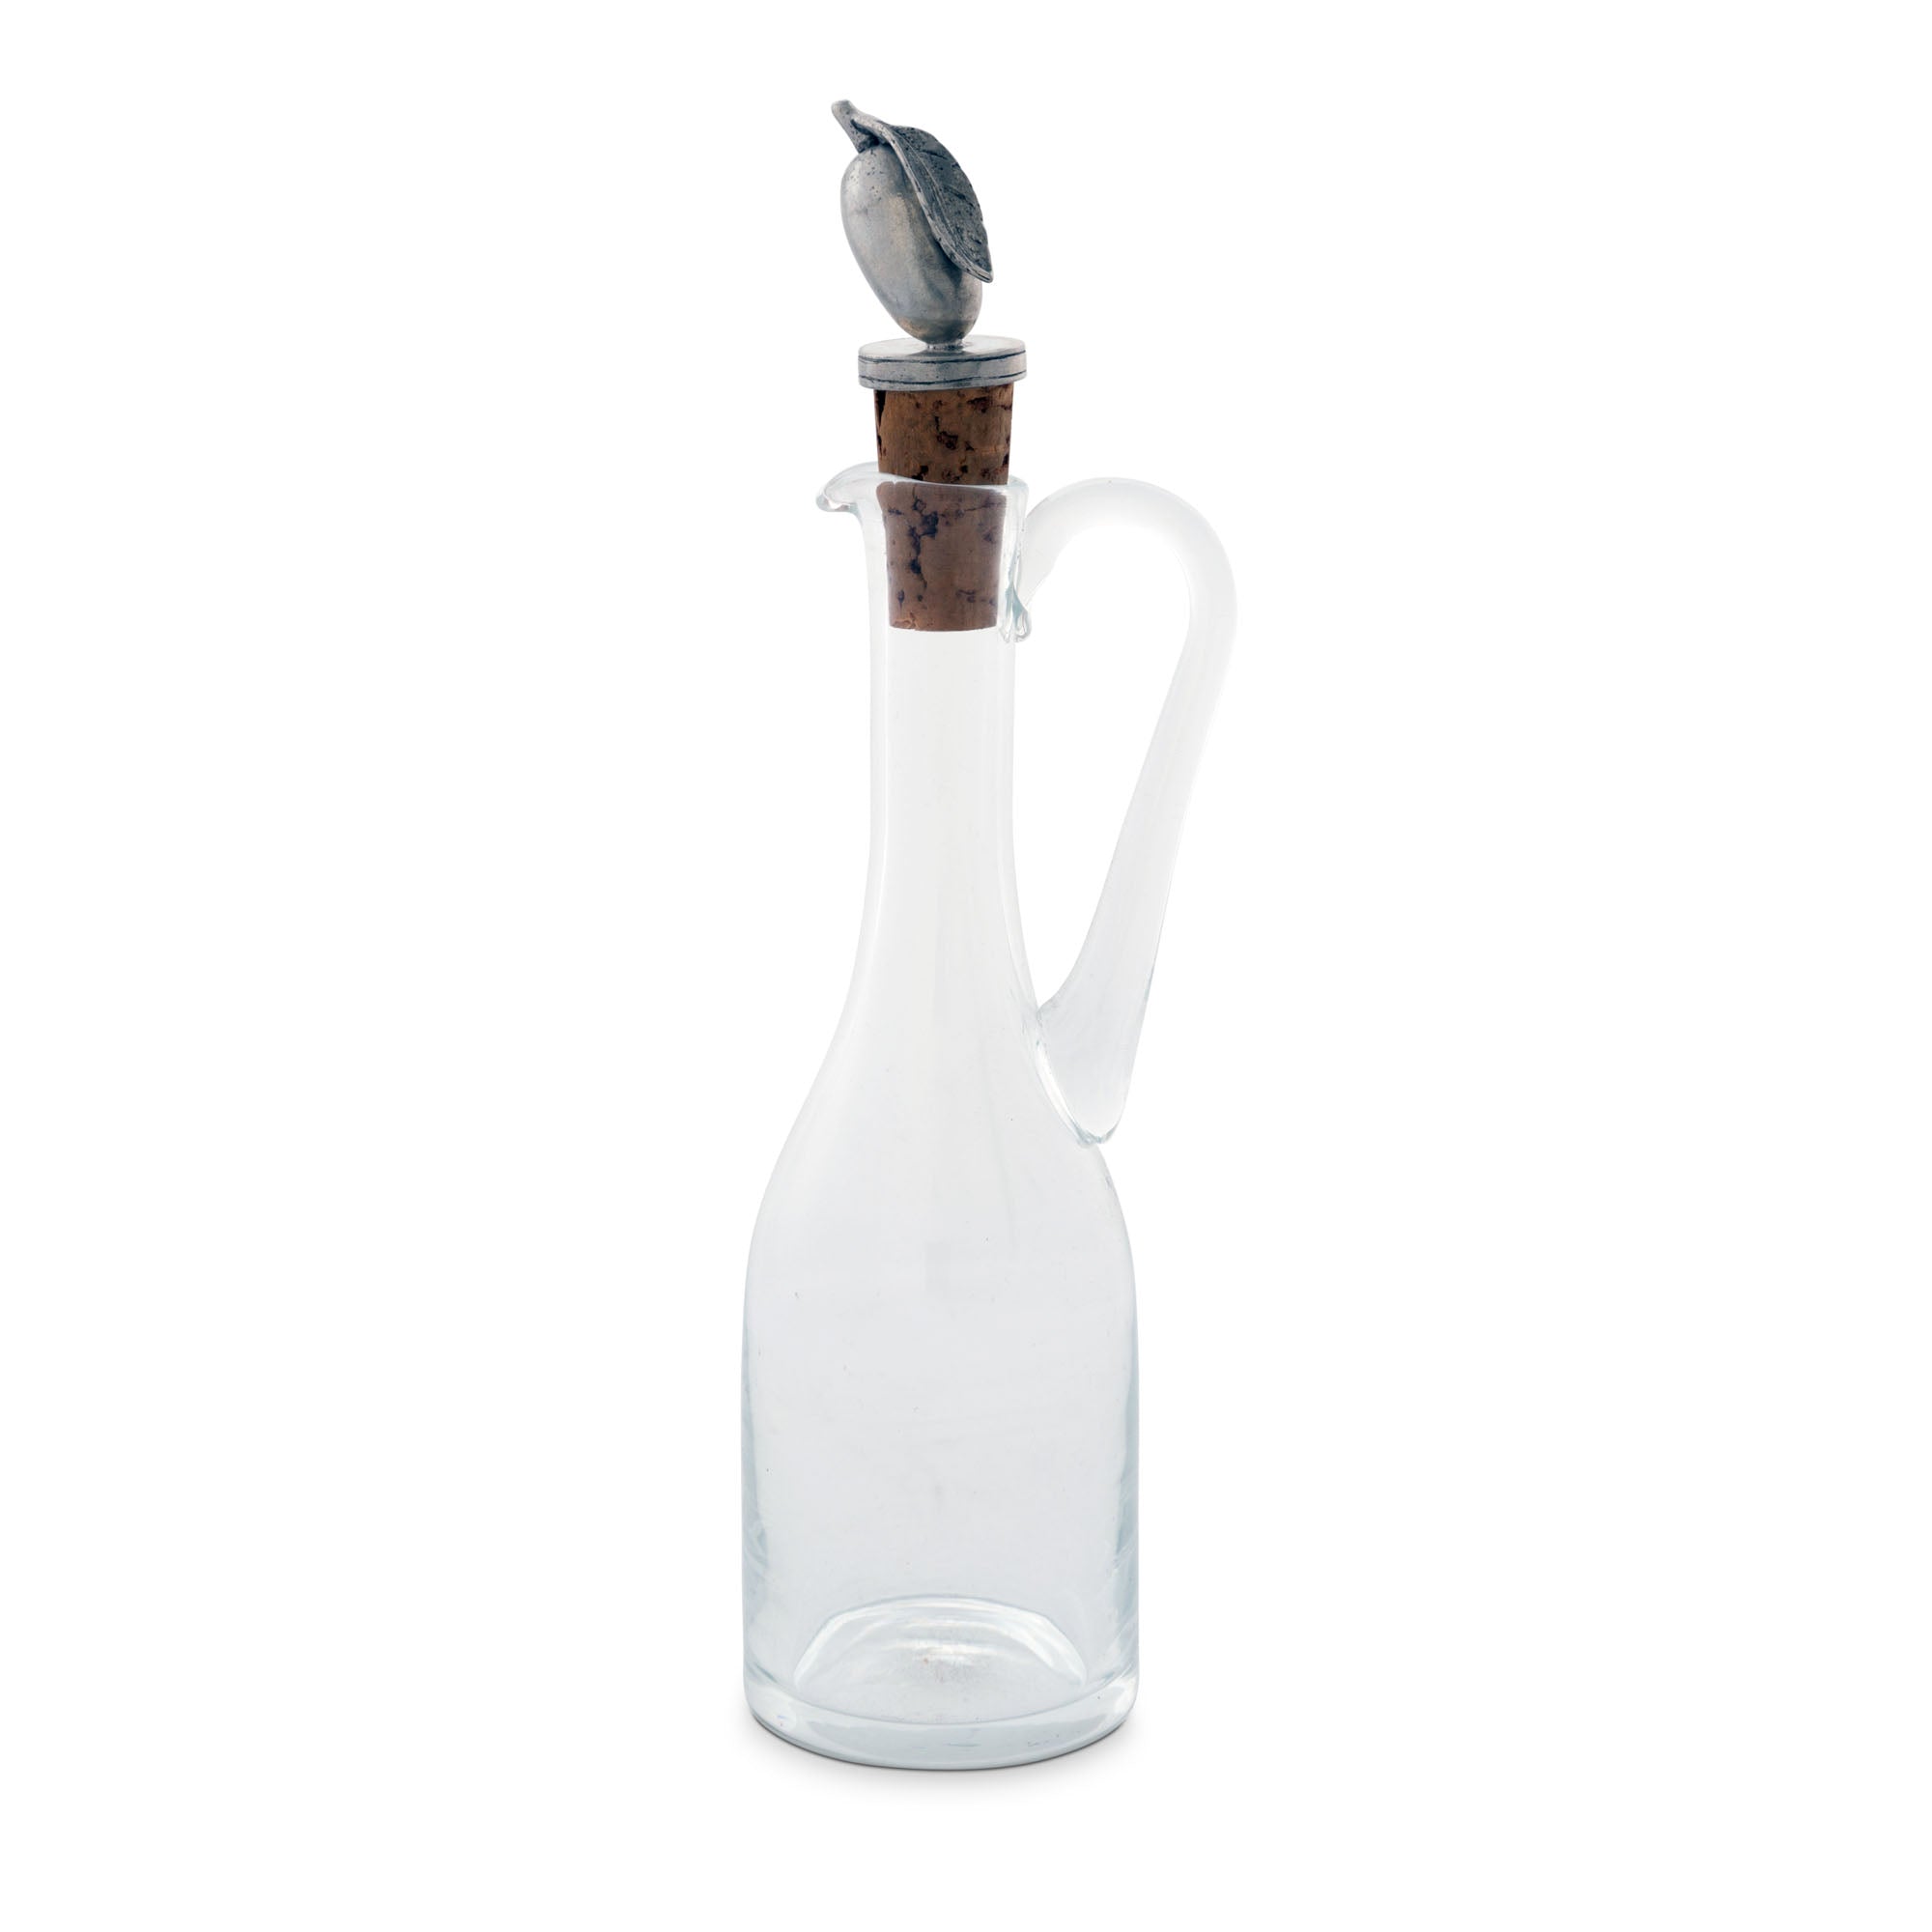 Vagabond House Cruet Bottle with Pewter Olive Head Cork Stopper Product Image